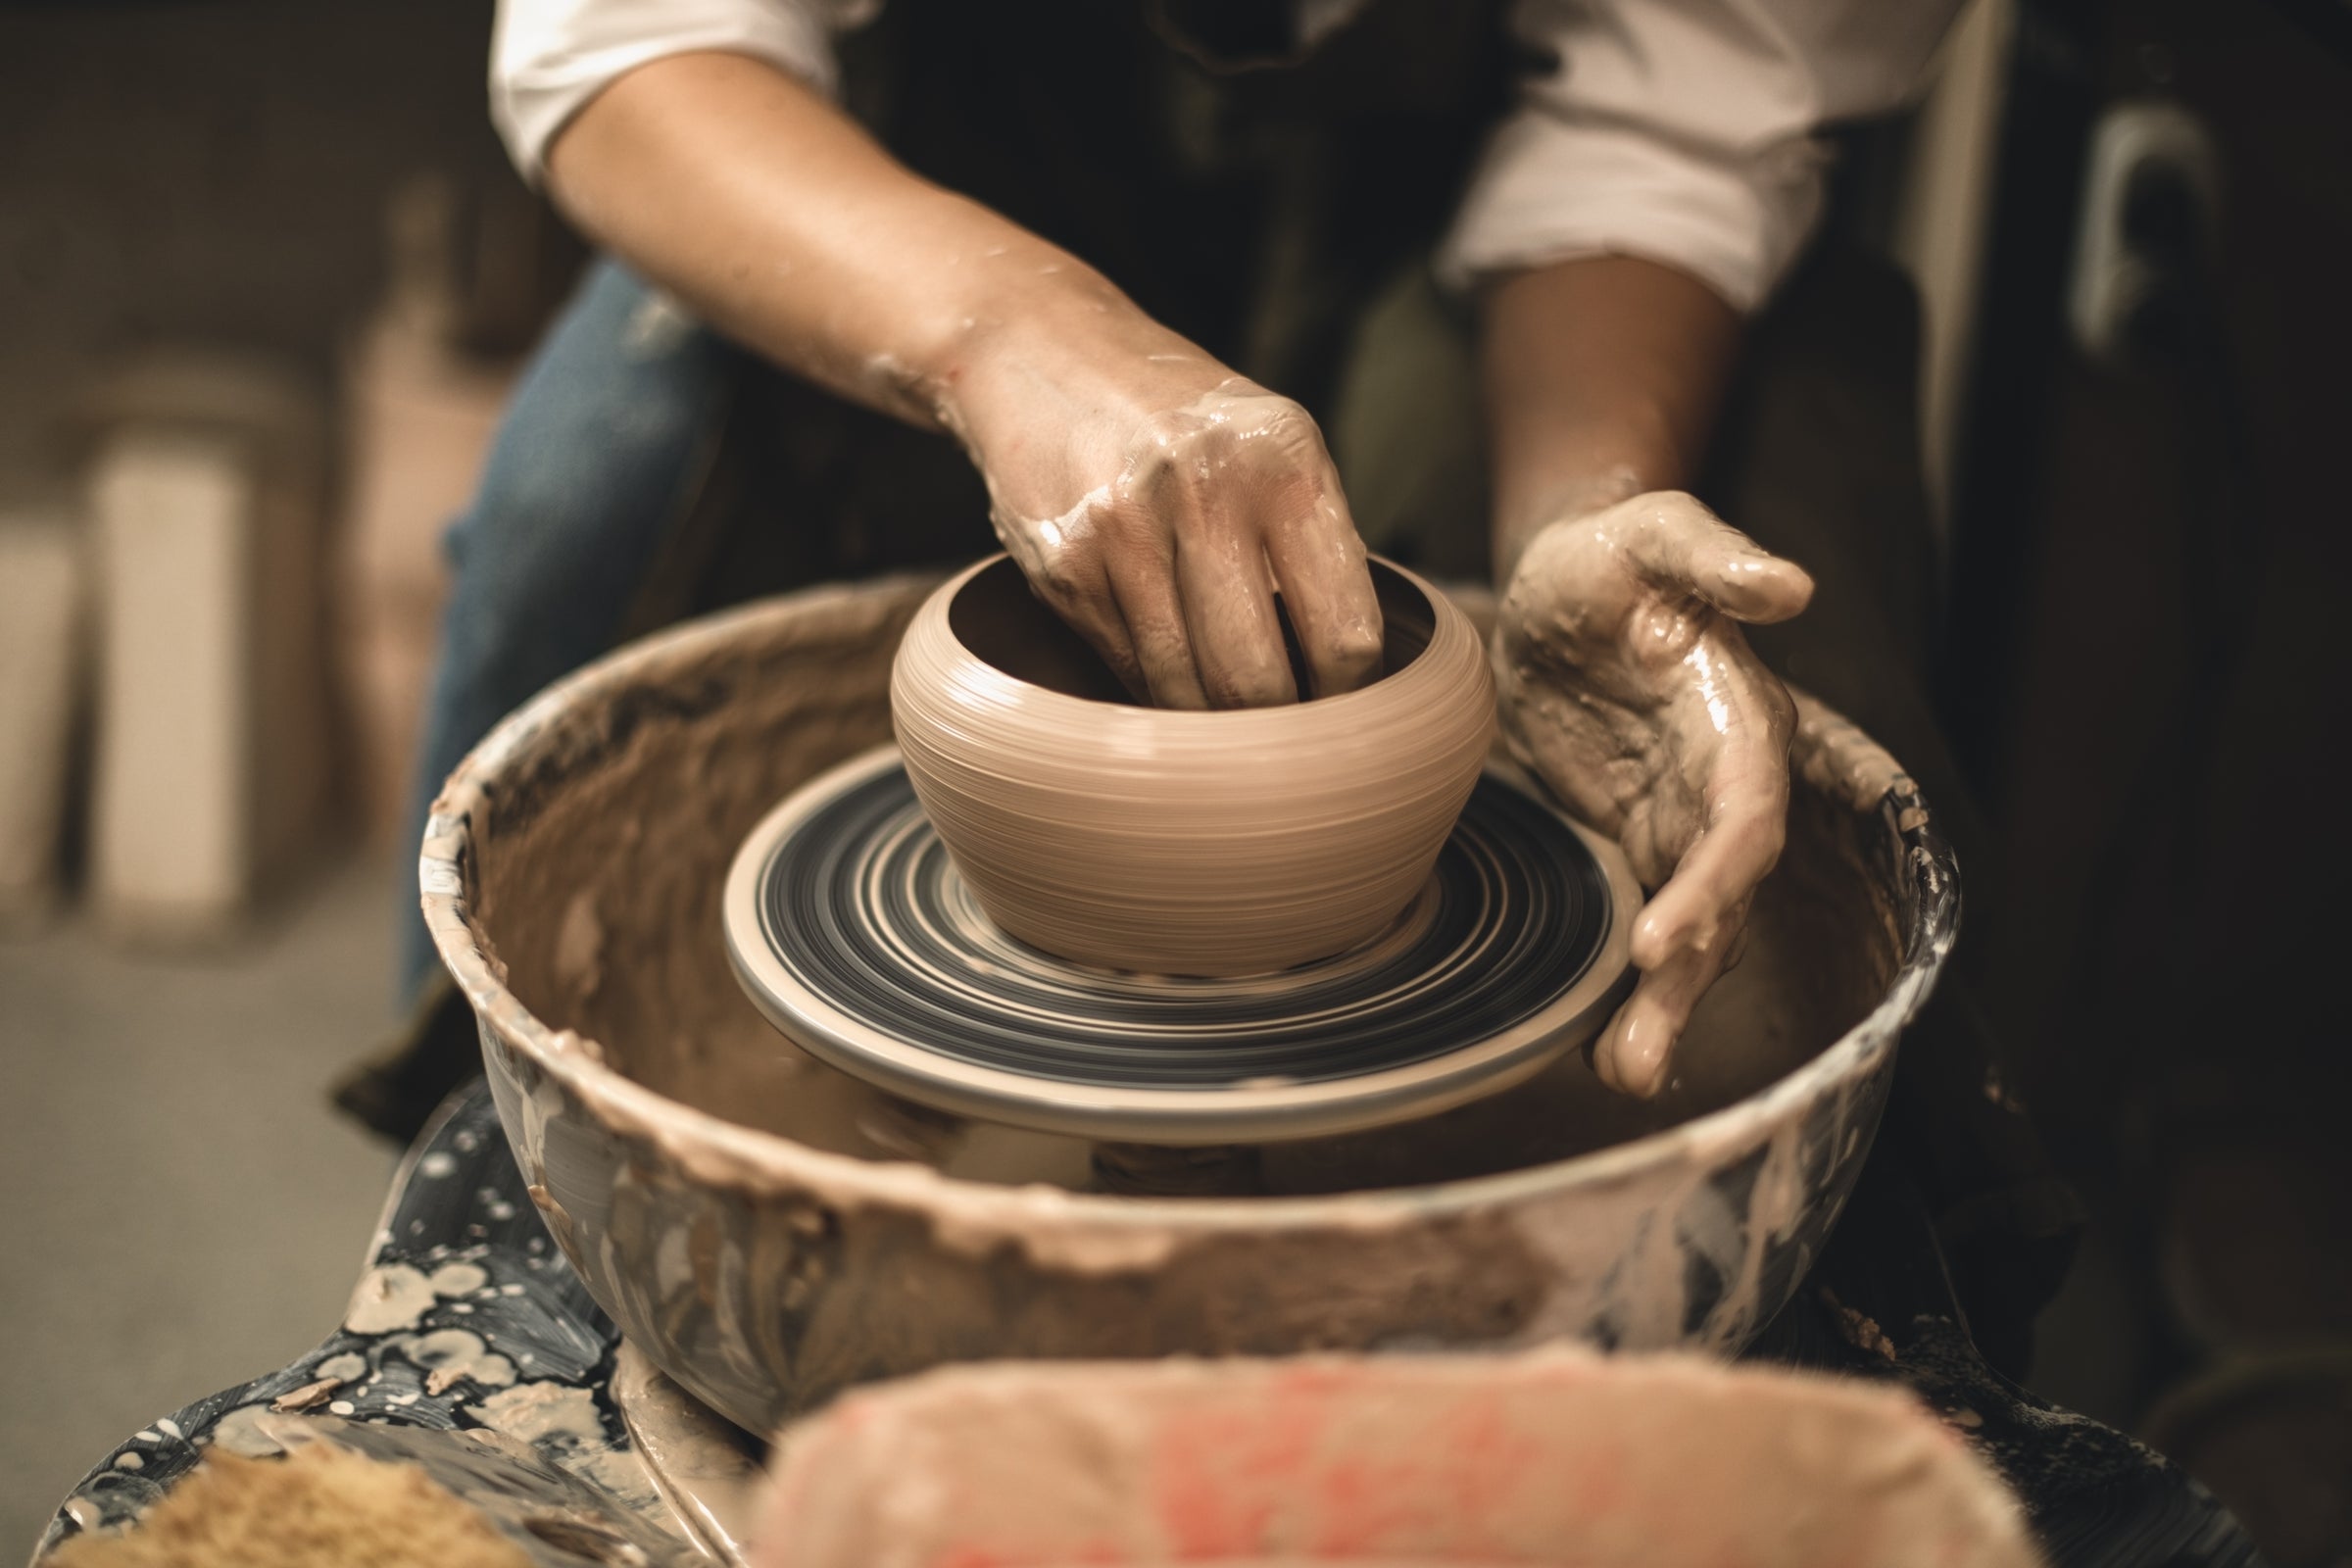 Learn to throw on the pottery wheel, take a private class or come in for  open studio! %